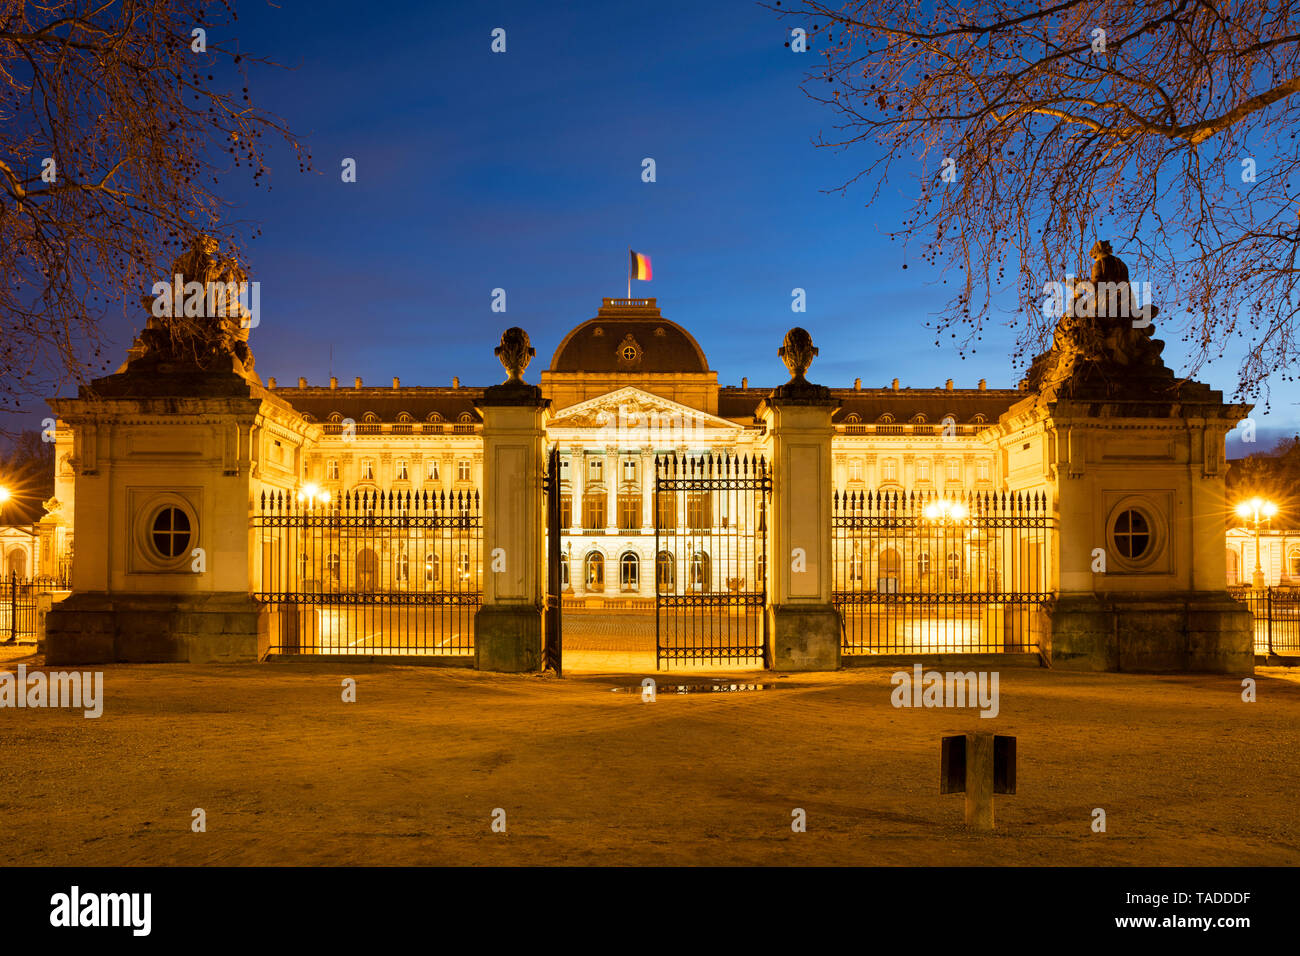 Belgium, Brussels, Royal Palace of Brussels in the evening Stock Photo